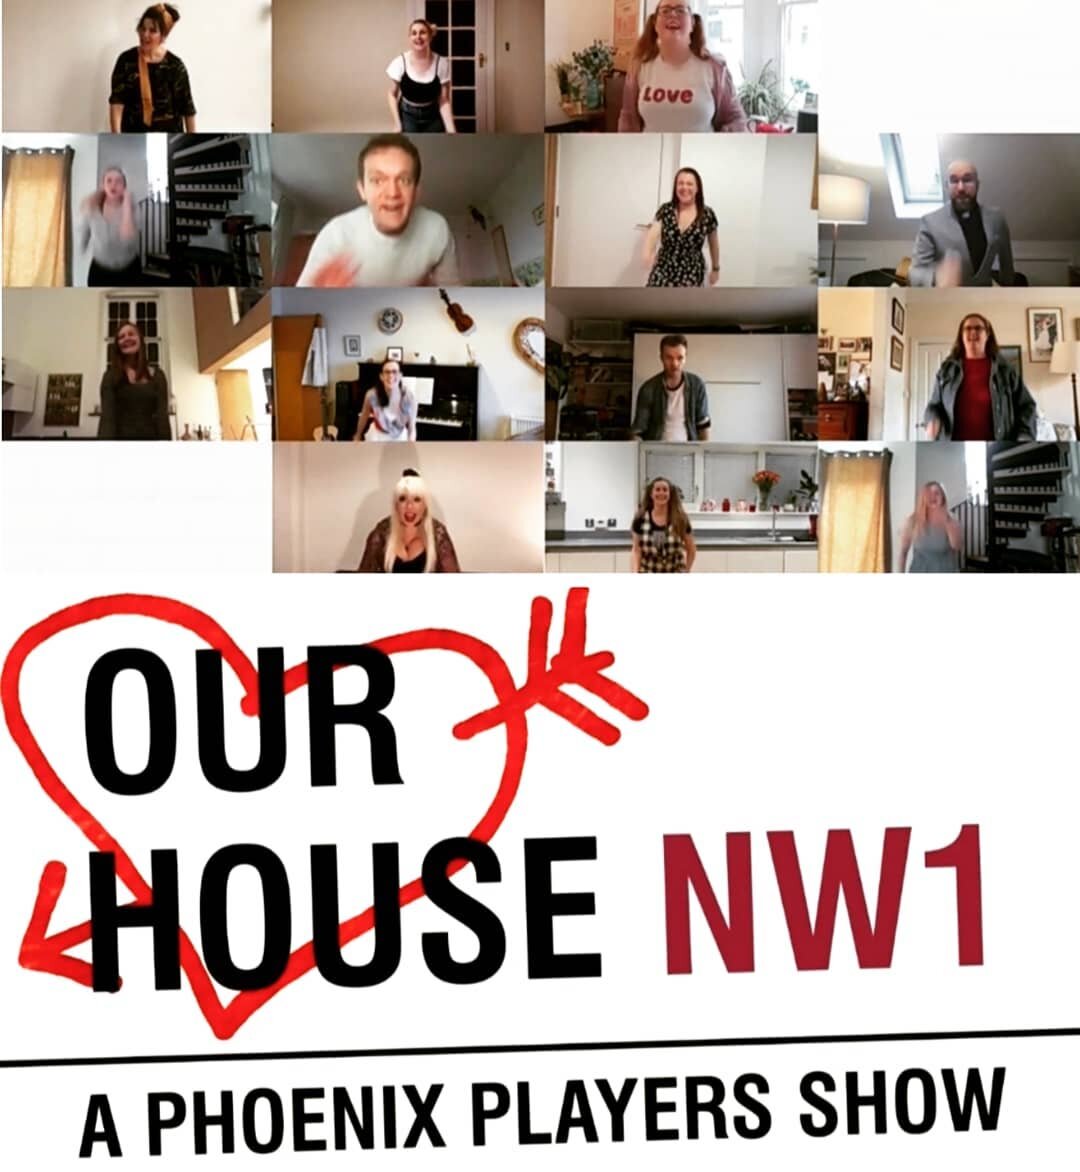 Just over a year ago we were supposed to put on a spectacular performance of Our House the Musical. In true #Phoenix style we won't let anything stop us from singing our hearts out, not even #COVID-19. So take a look at our little memento to the show